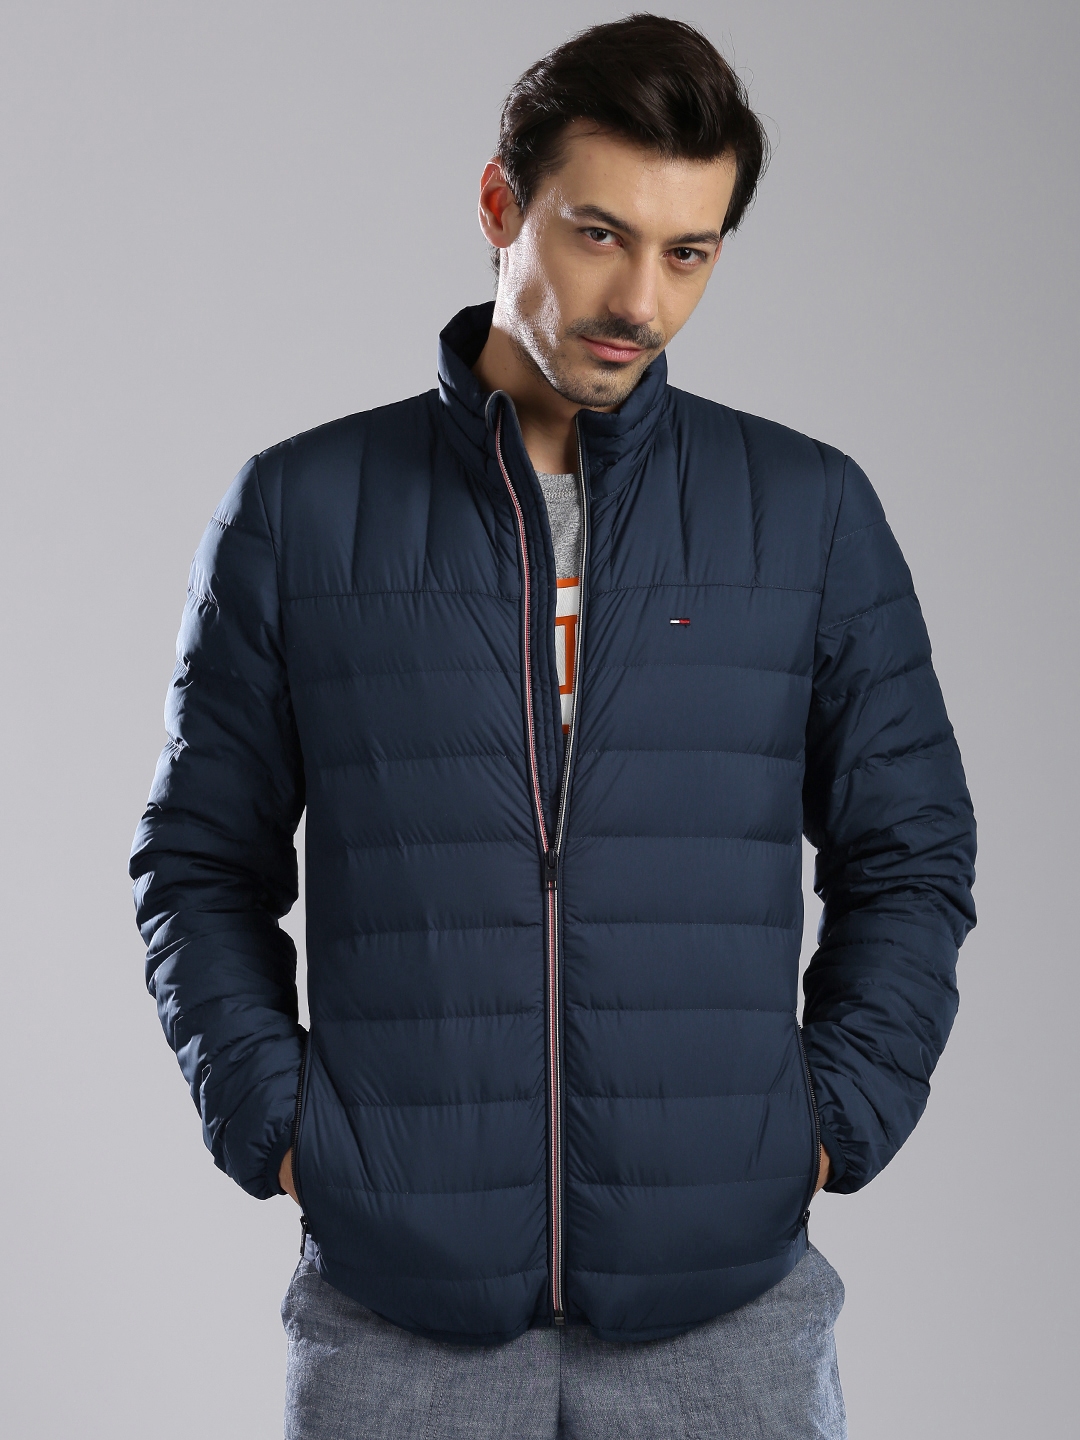 Buy Tommy Hilfiger Navy Quilted Jacket - Jackets for Men 1577174 | Myntra